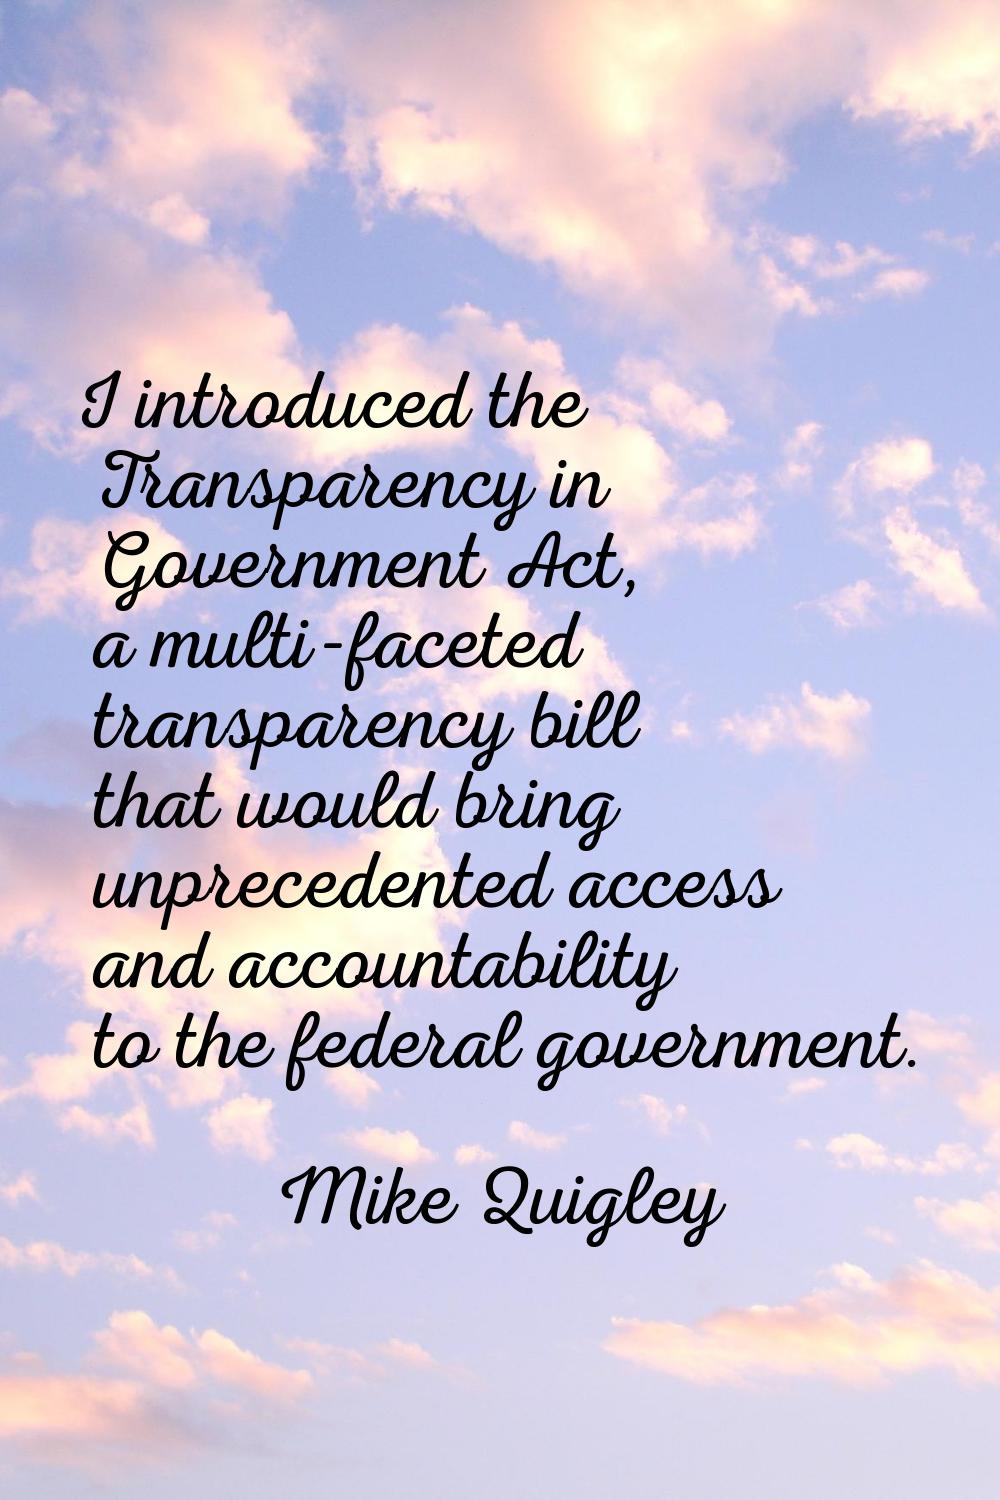 I introduced the Transparency in Government Act, a multi-faceted transparency bill that would bring